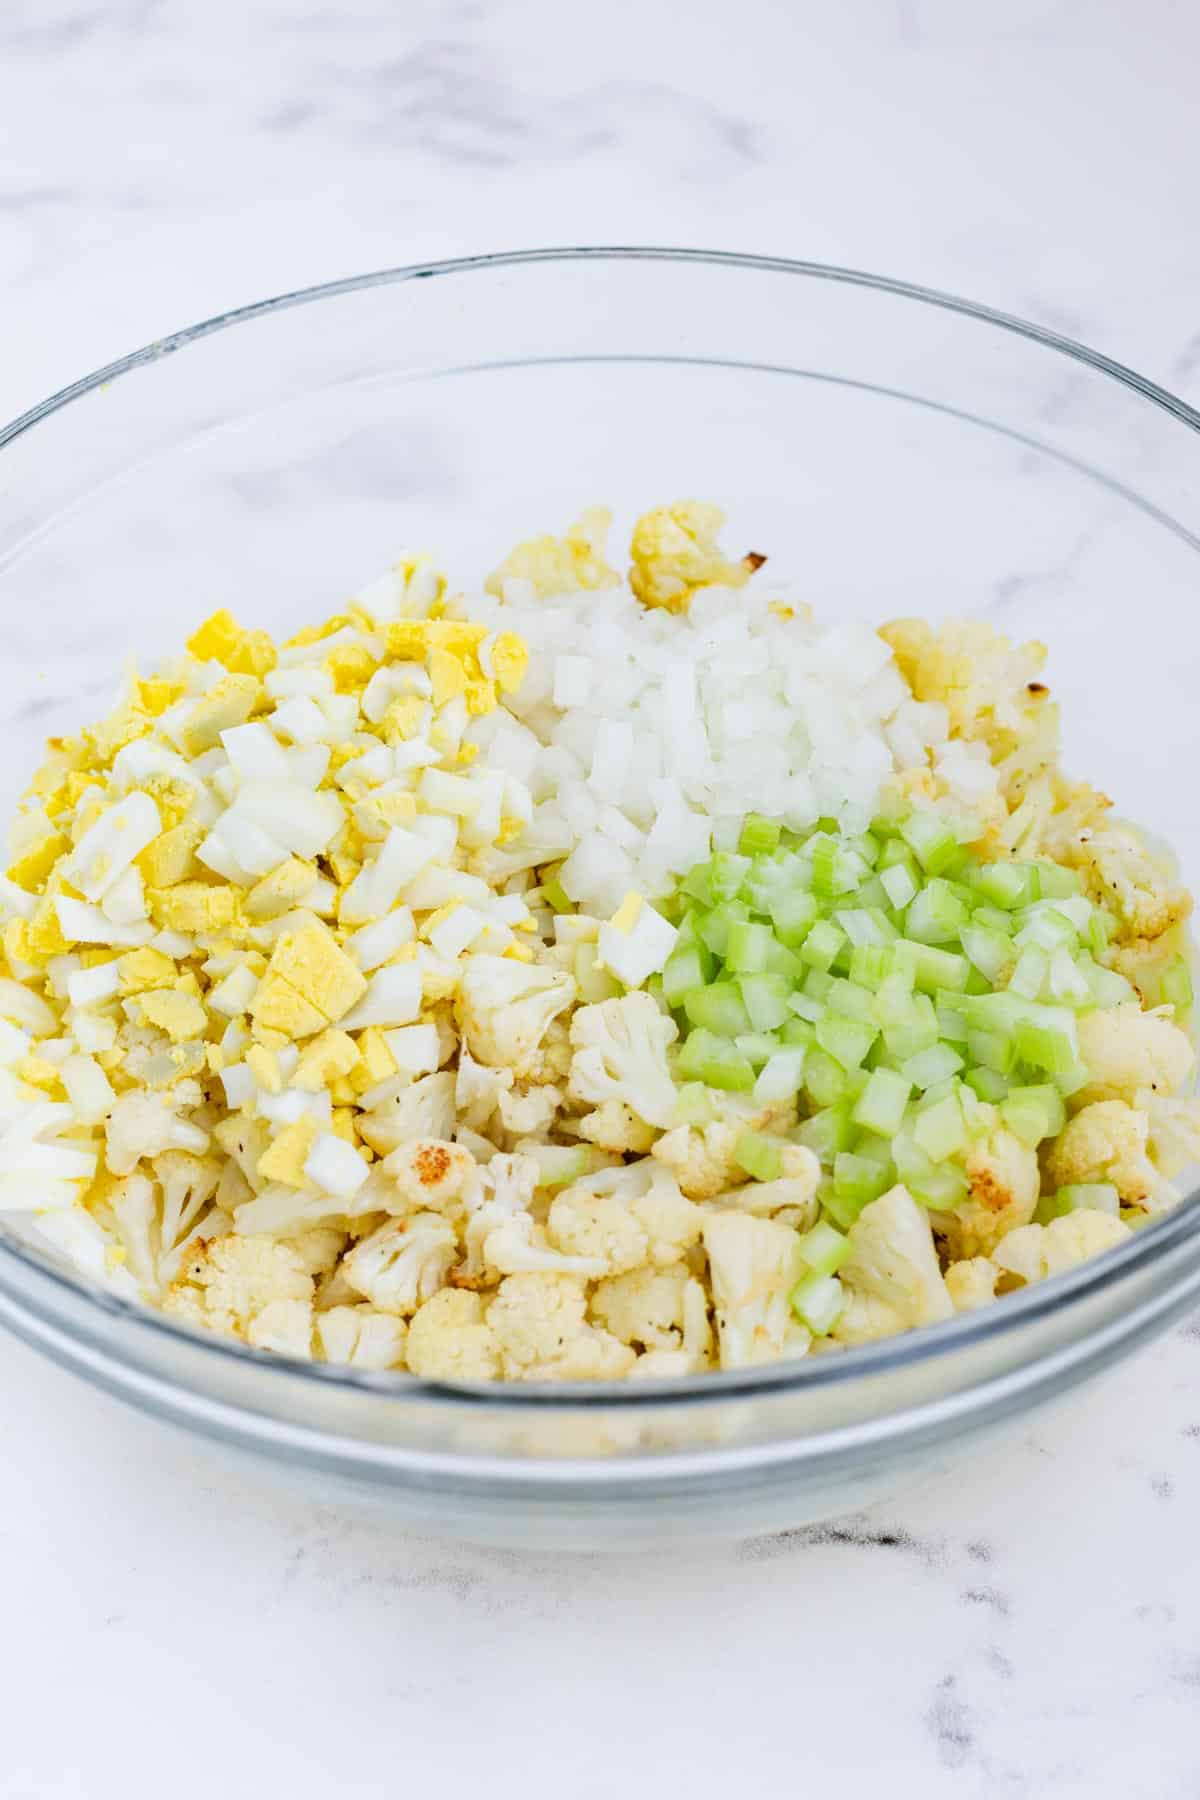 Roasted cauliflower, eggs, celery, onion, and sauce are mixed together.